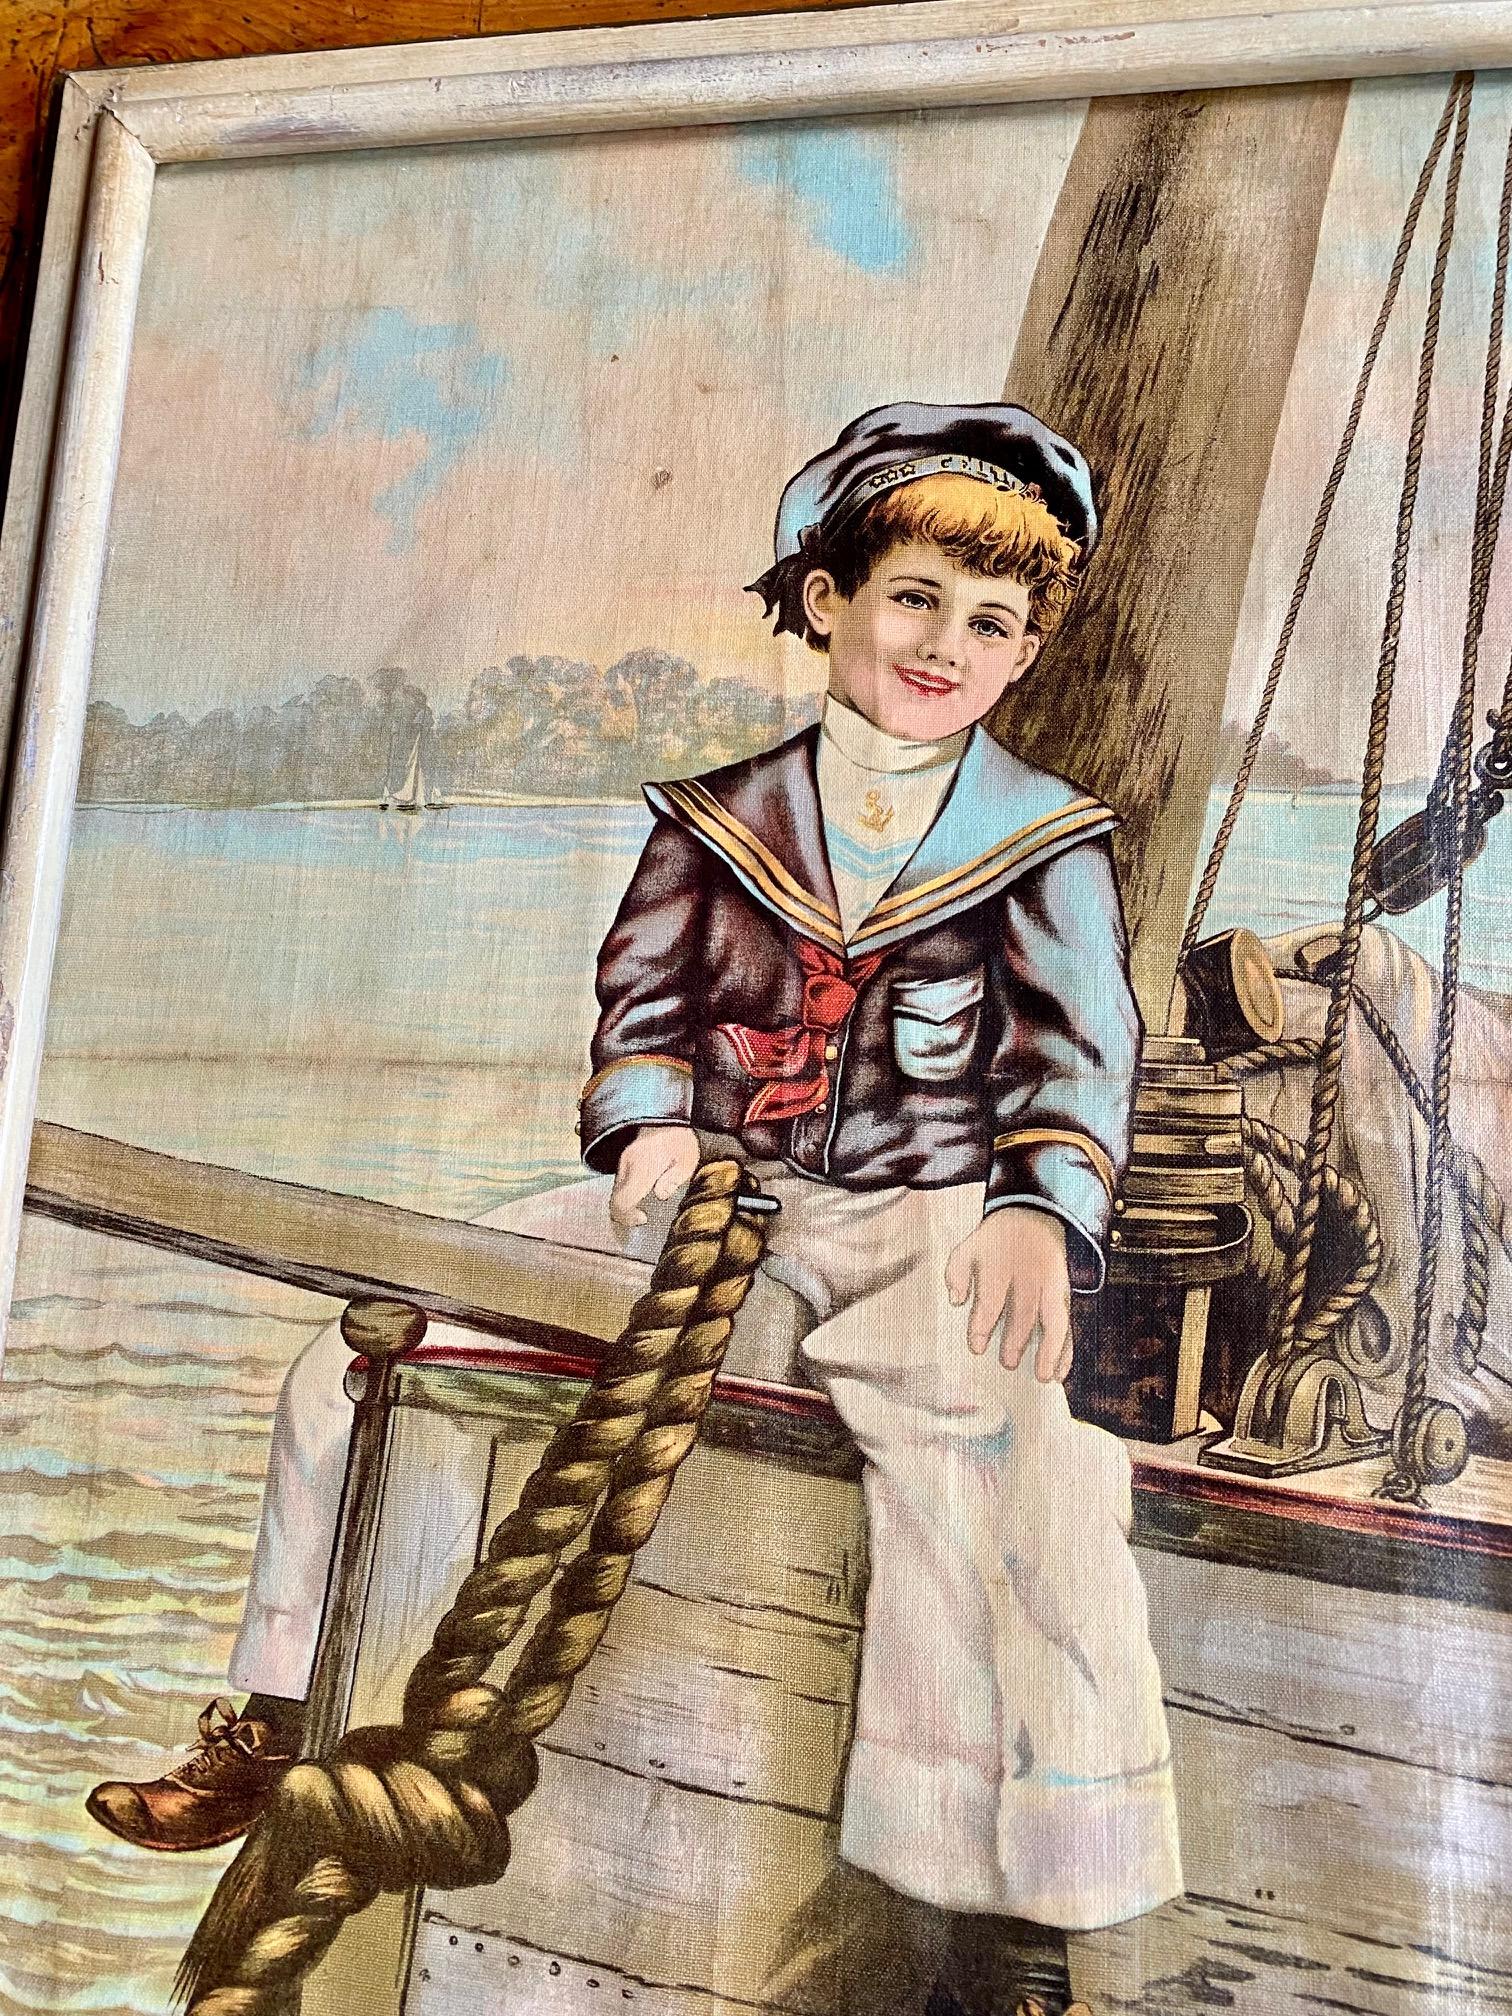 19th Century chromolithograph of a sailor boy, circa 1880, a colored print on canvas view of a young American sailor boy sitting astride a bowsprit. A classic charming image with great detail (look at the detailed braiding on the lines). 

The